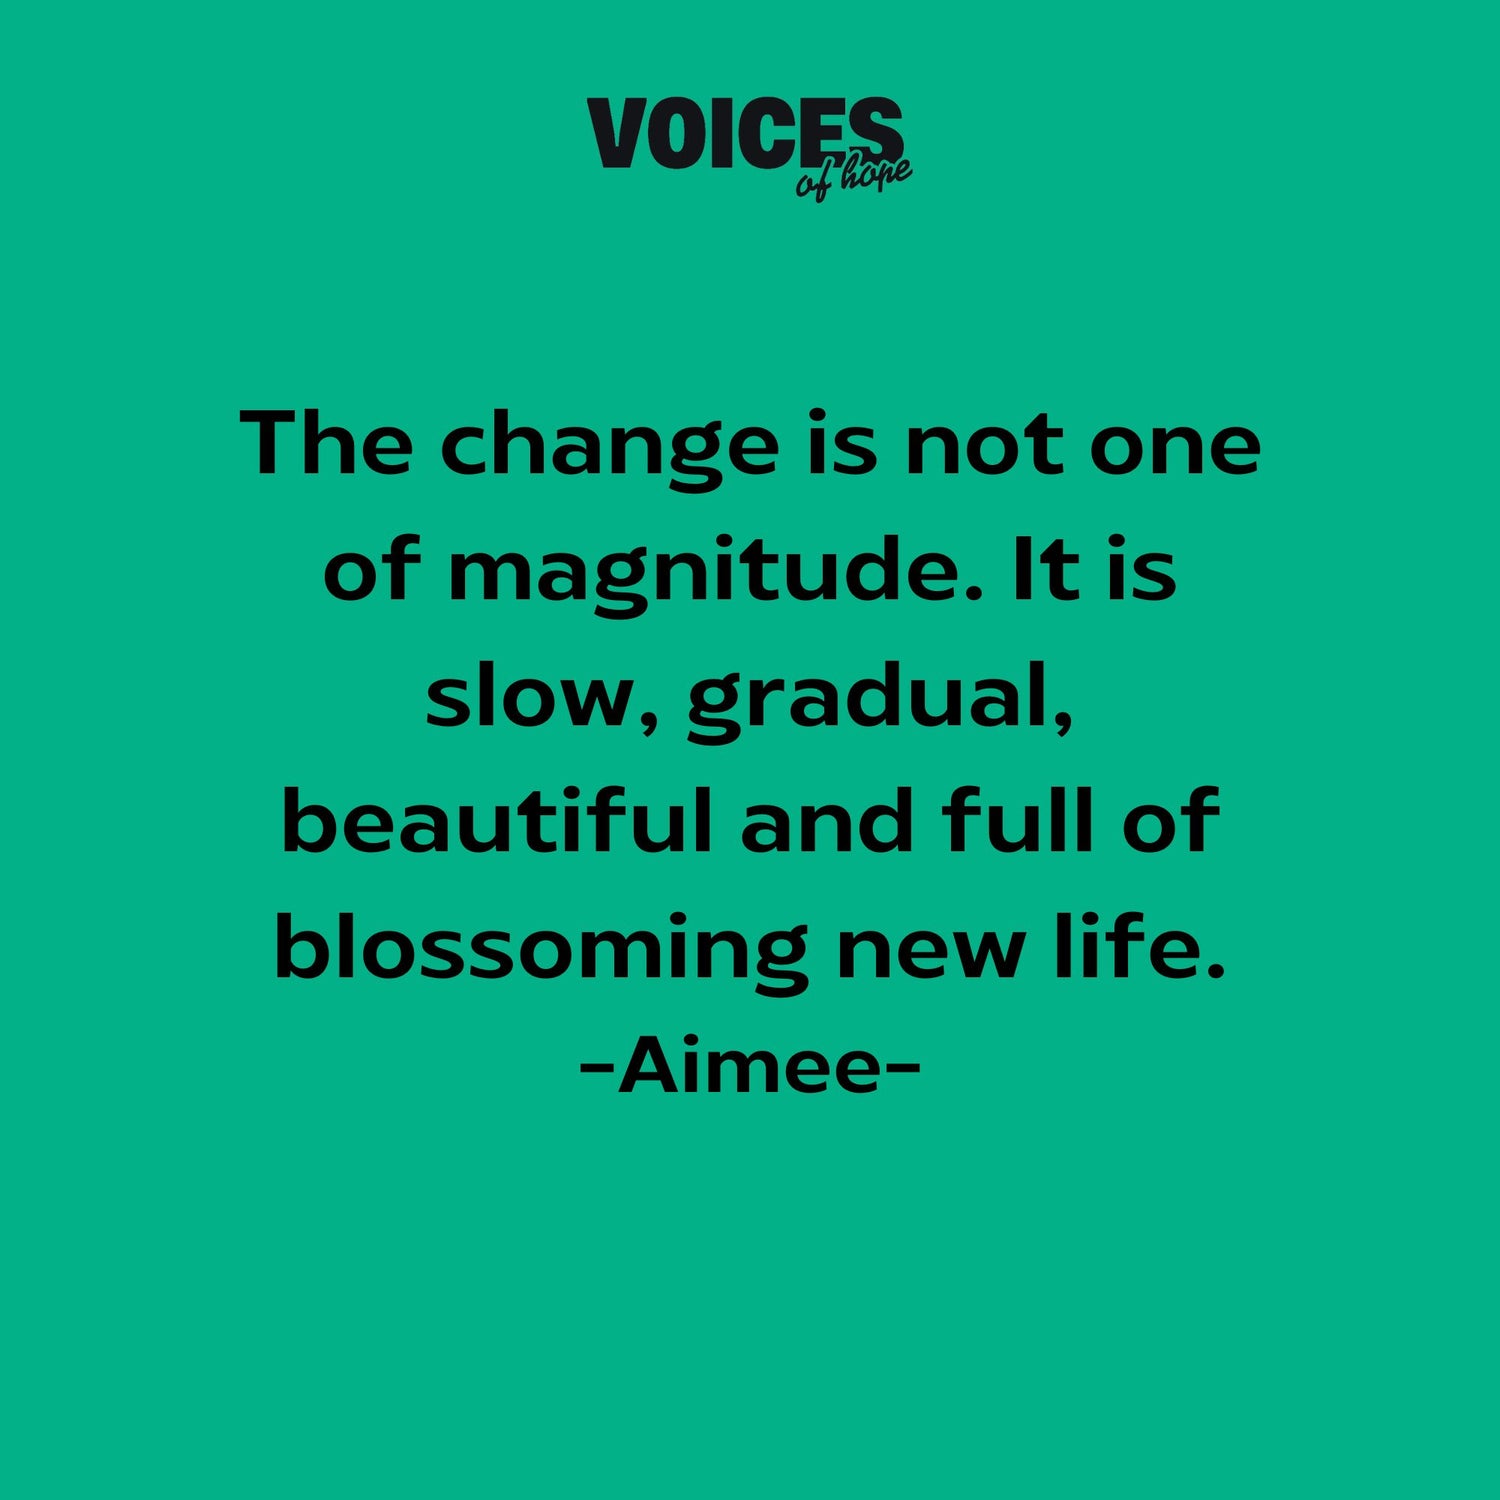 Green background with black writing that reads: "the change is not one of magnitude. It is slow, gradual, beautiful and full of blossoming new life. Aimee."